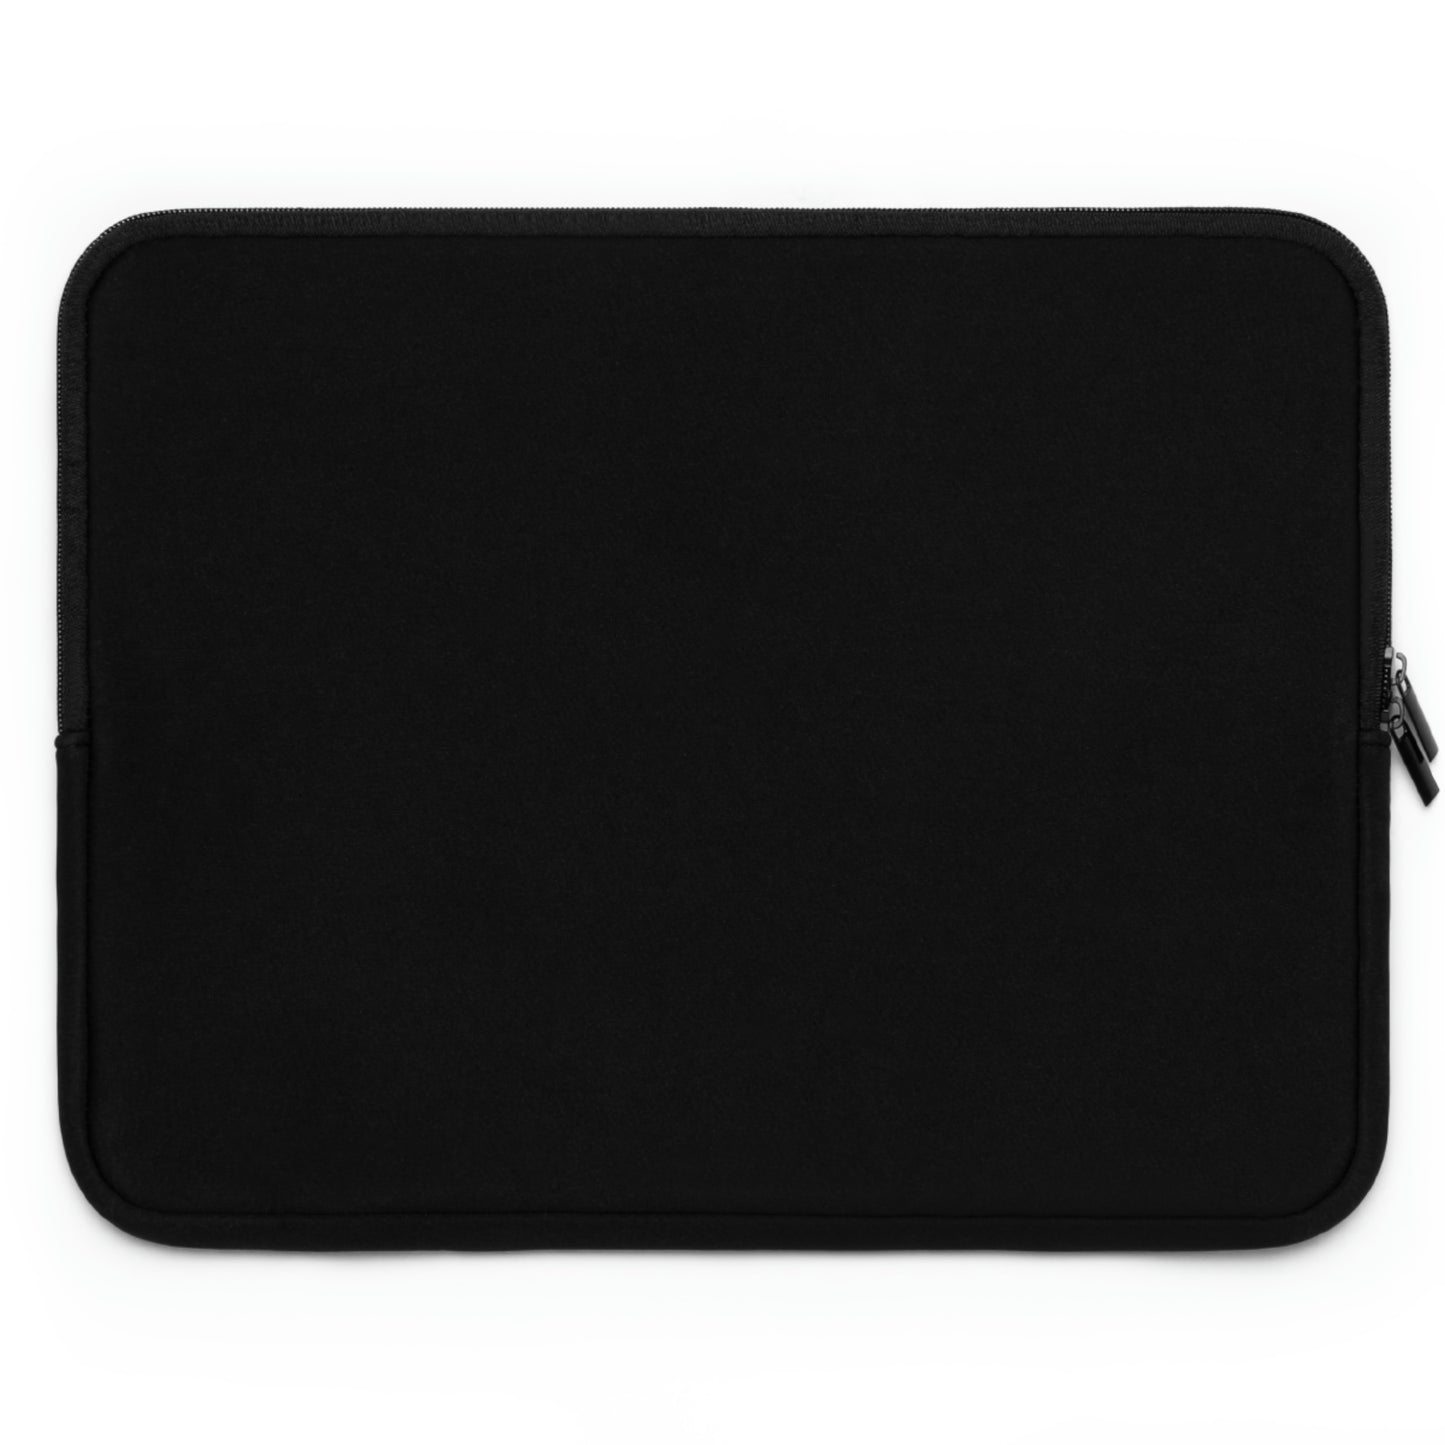 Tony South: "Credo quia absurdum (I believe because it is absurd)" - Laptop Sleeve